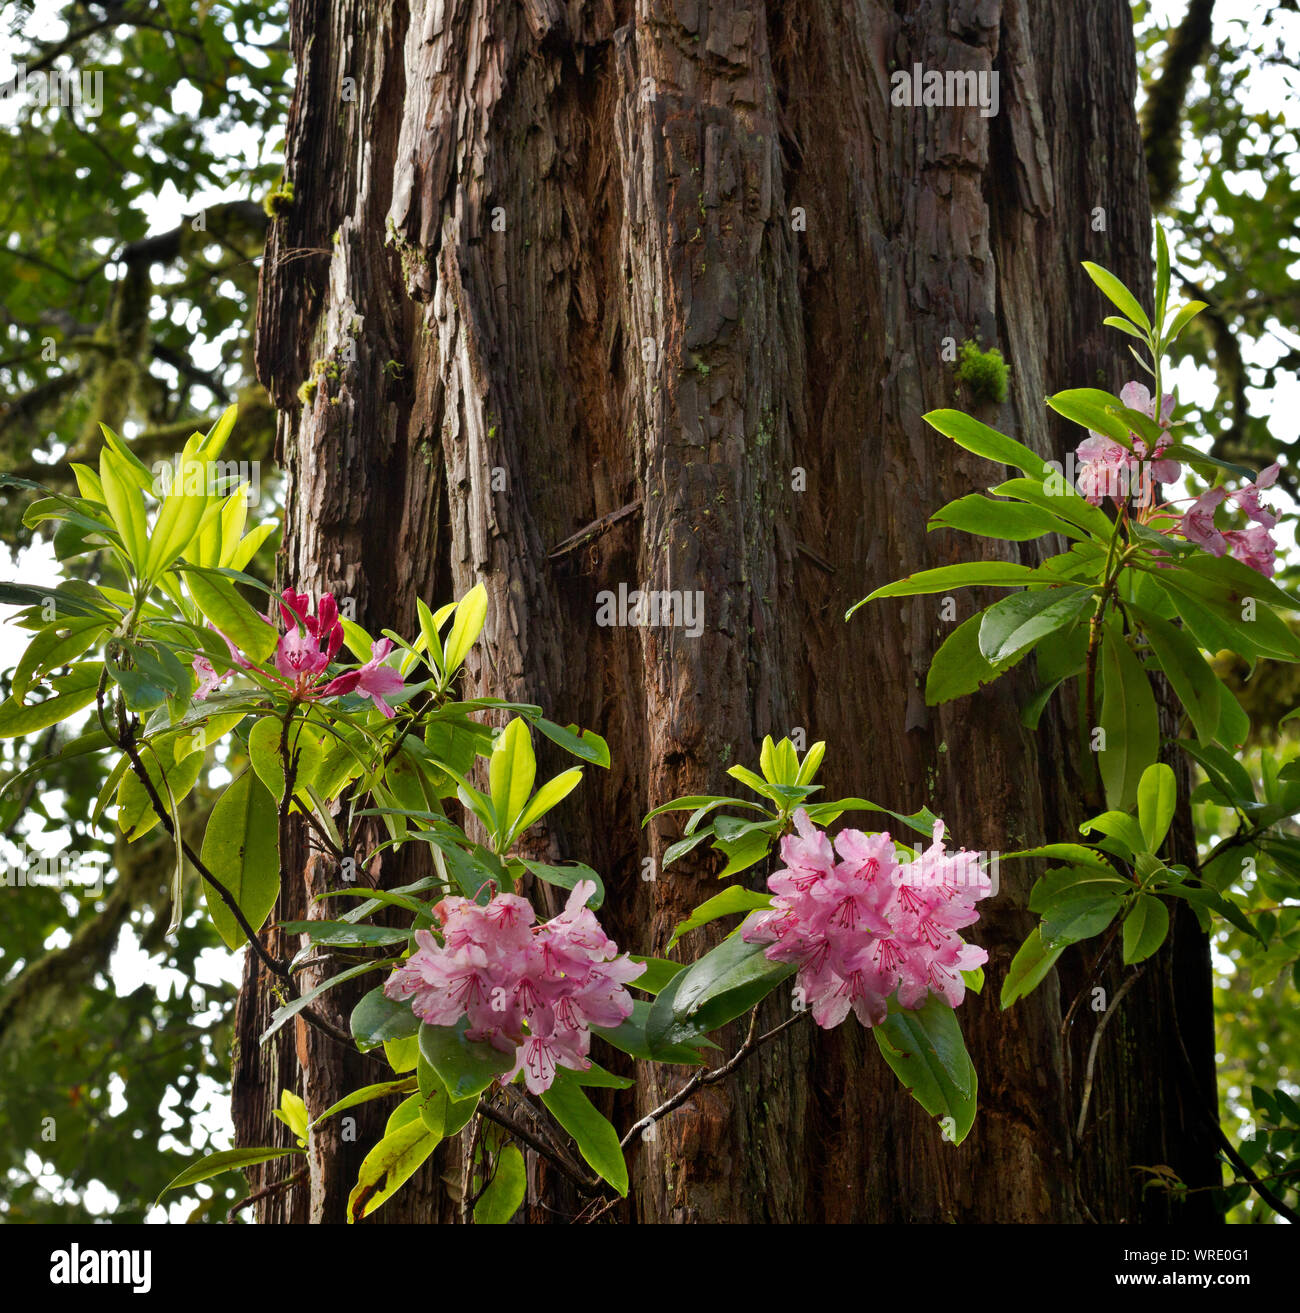 CA03518-00...CALIFORNIA - Rhododendron flowers and a large redwood tree on the Hiouchi Trail in Jedediah Smith Redwoods State Park. Stock Photo